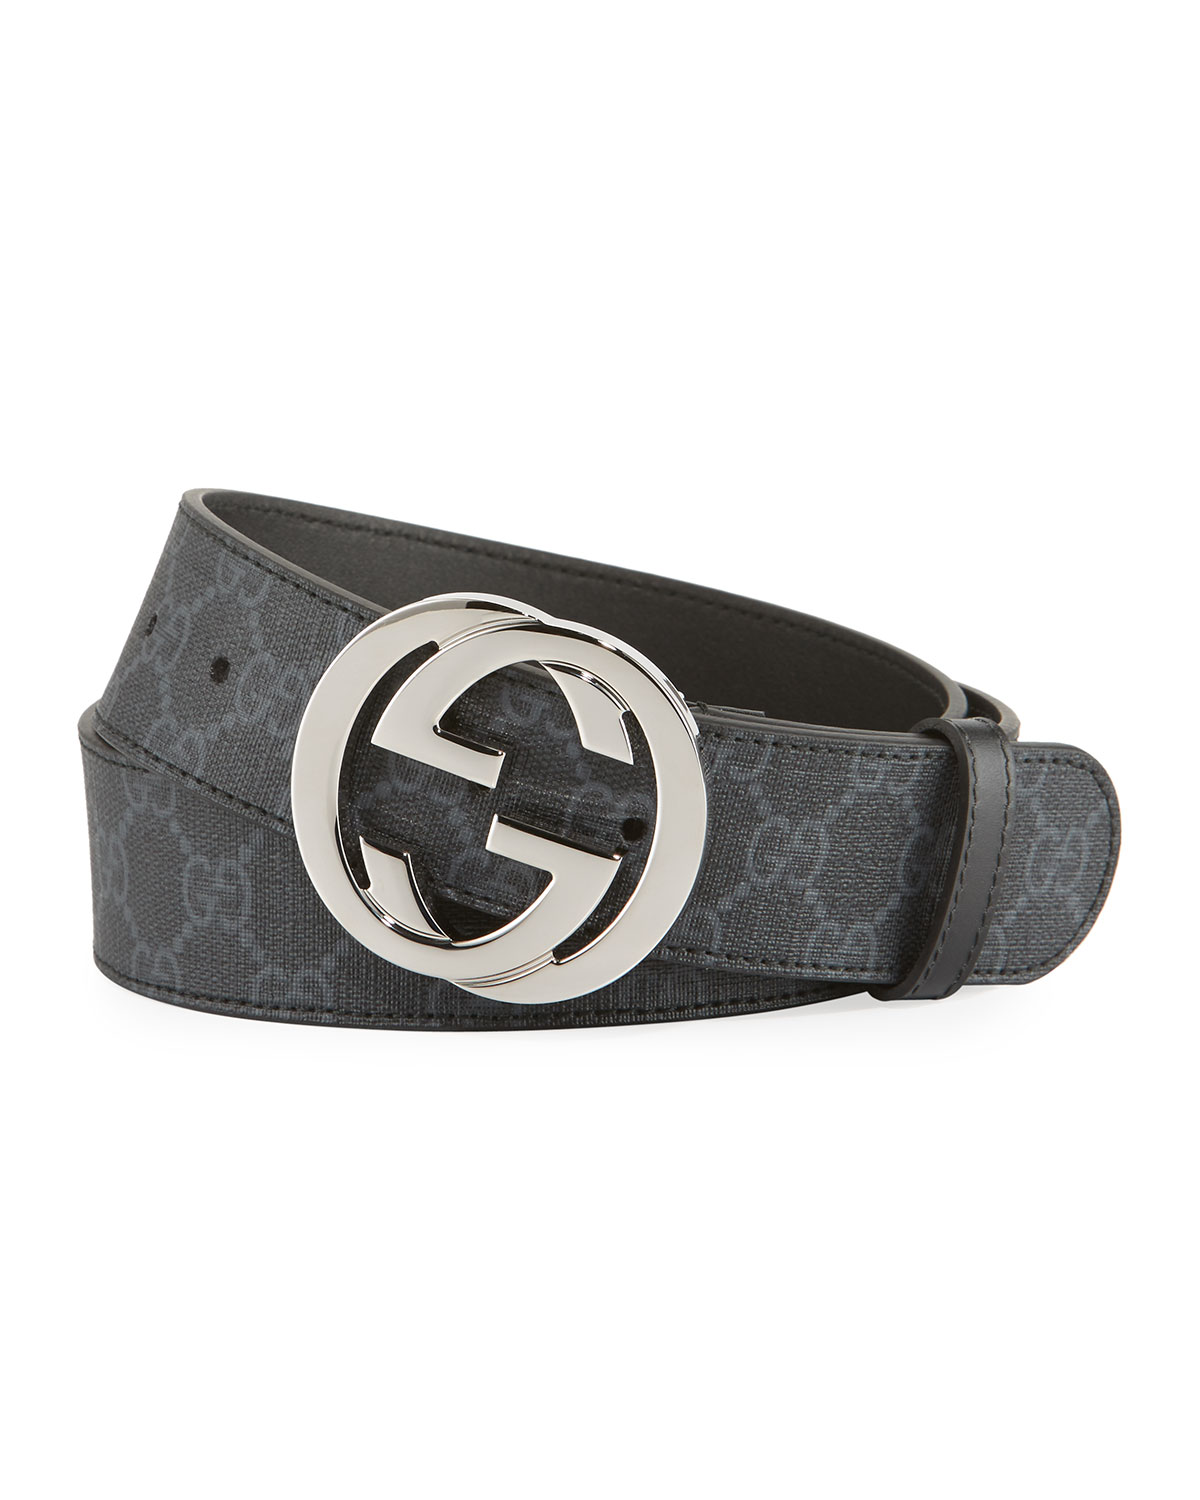 Gucci GG Supreme Belt with G Buckle 